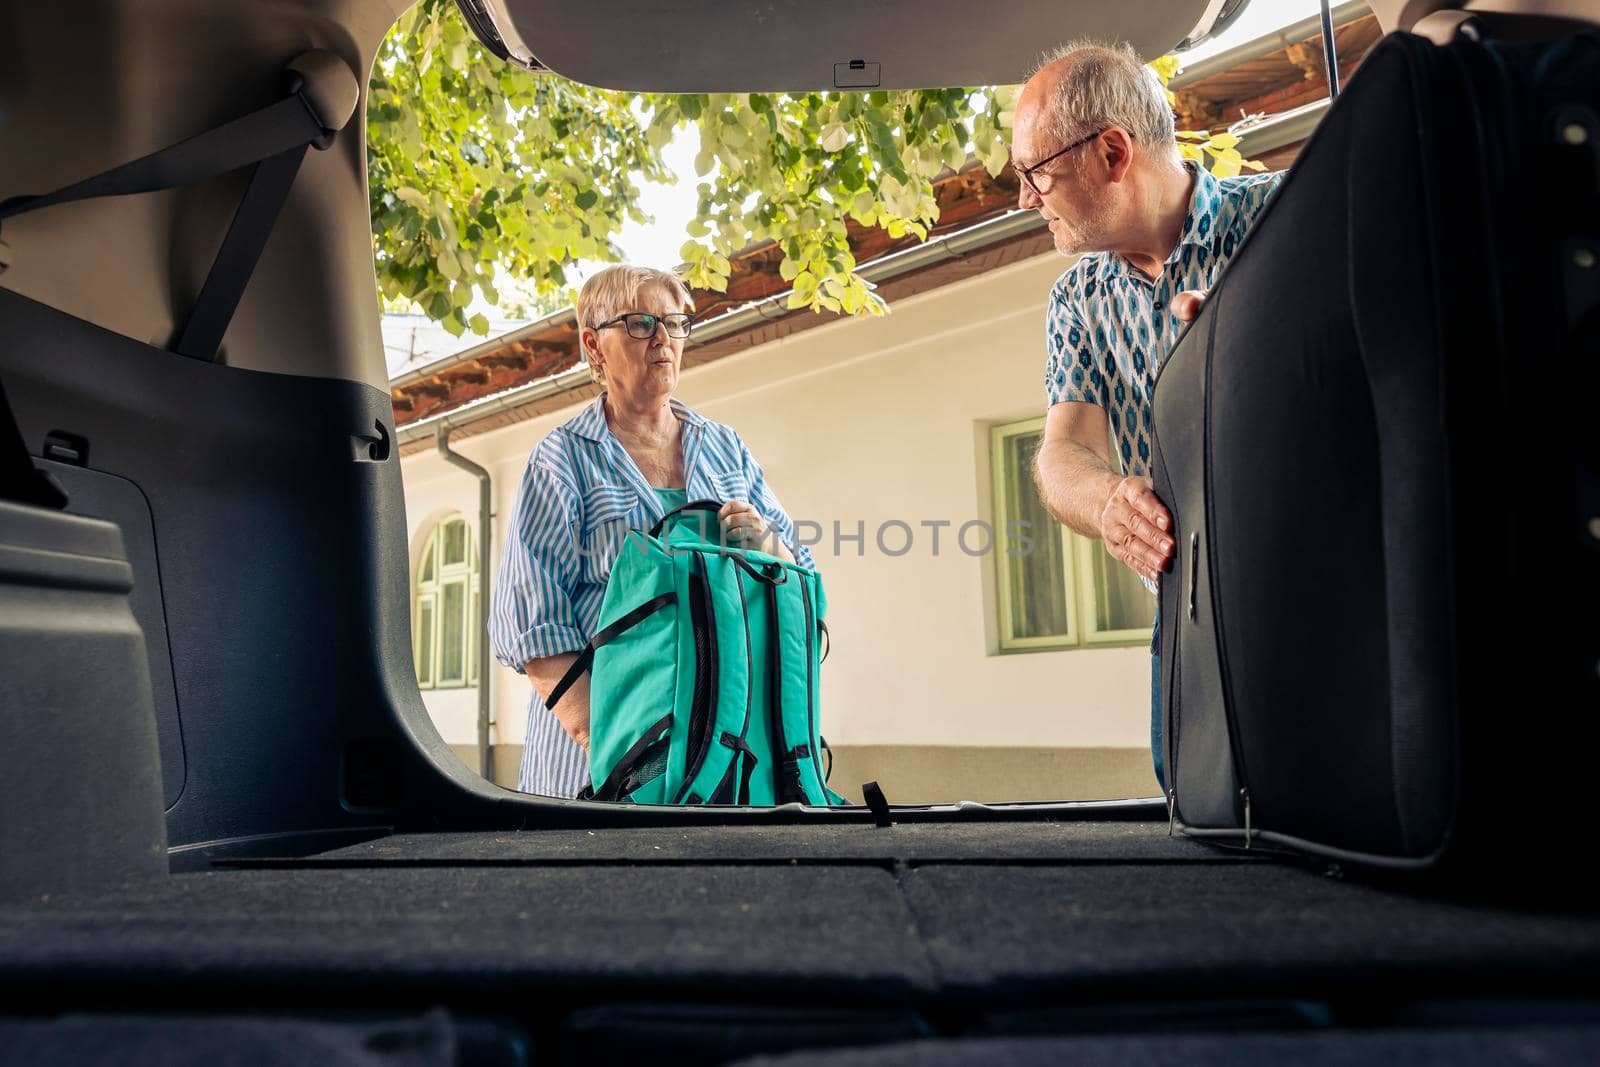 Senior people loading baggage in car trunk, preparing to leave on summer holiday with vehicle. Couple travelling on vacation road trip in retirement age, going on adventure destination.